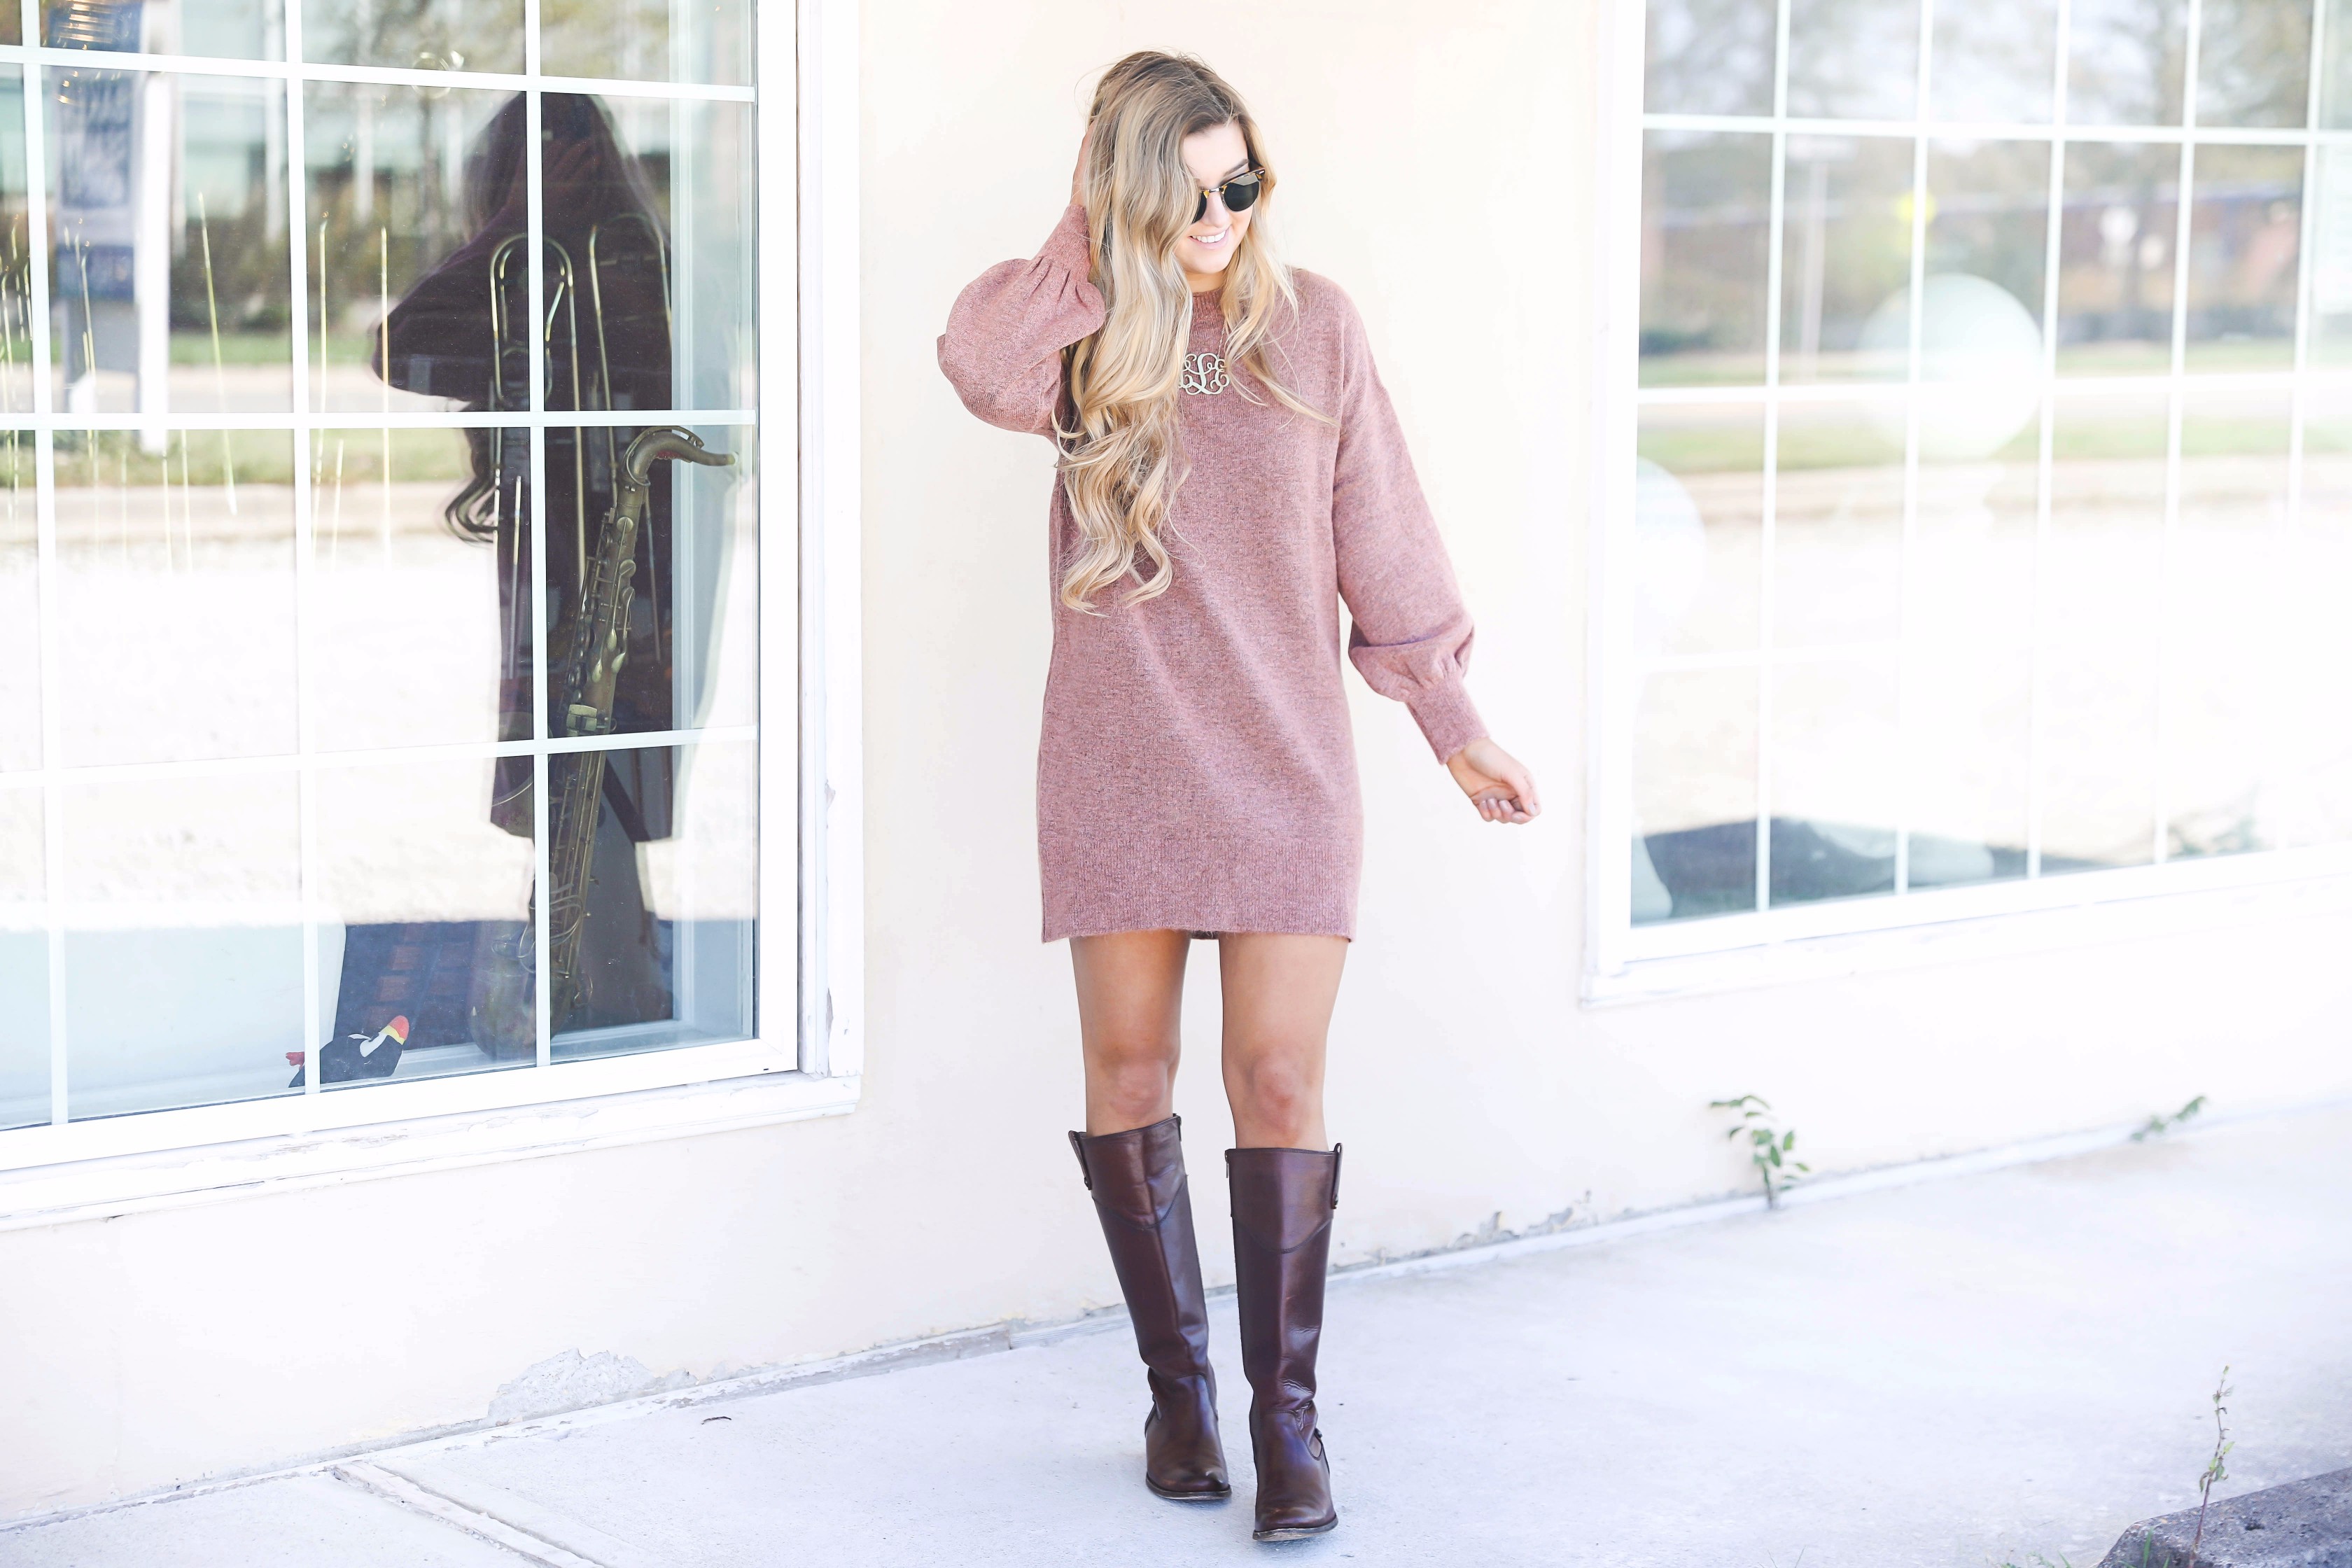 Sweater dress with puffy sleeves and brown riding boots! Paired with a large monogram necklace, perfect fall outfit! Details on fashion blog daily dose of charm by lauren lindmark